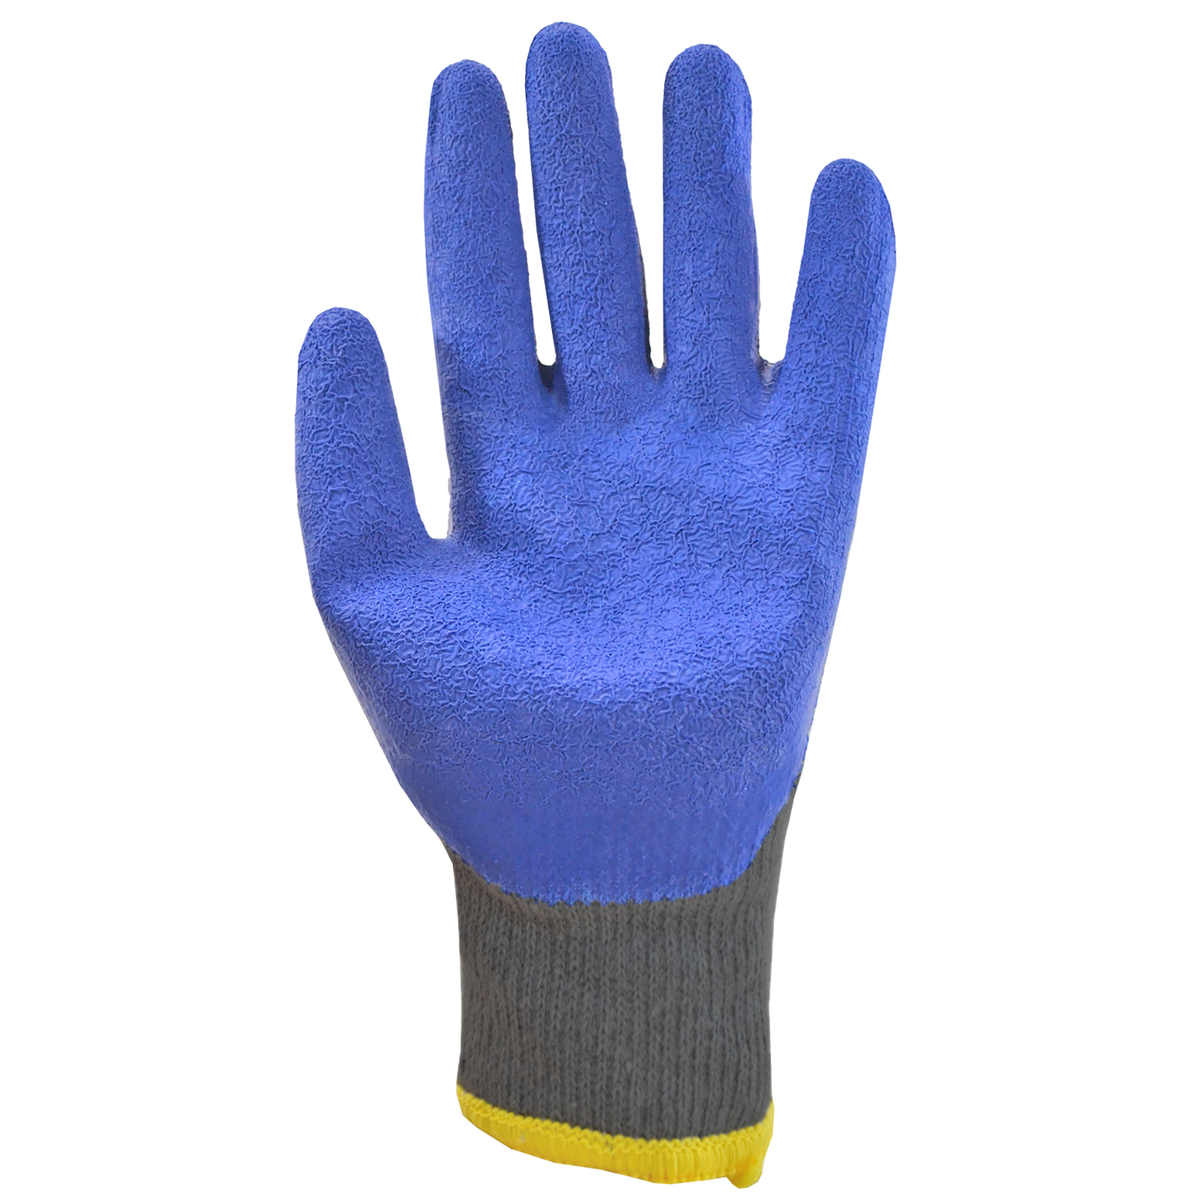 http://technopackcorp.com/cdn/shop/files/SAFETY-WORK-GLOVES-WITH-CRINKLE-LATEX-DIPPED-PALMS-PACK-OF-12-S-GD-07-JORESTECH-H_7_674661fd-f261-43b4-9fda-4bdecb5f9ebd_1200x1200.png?v=1689087308